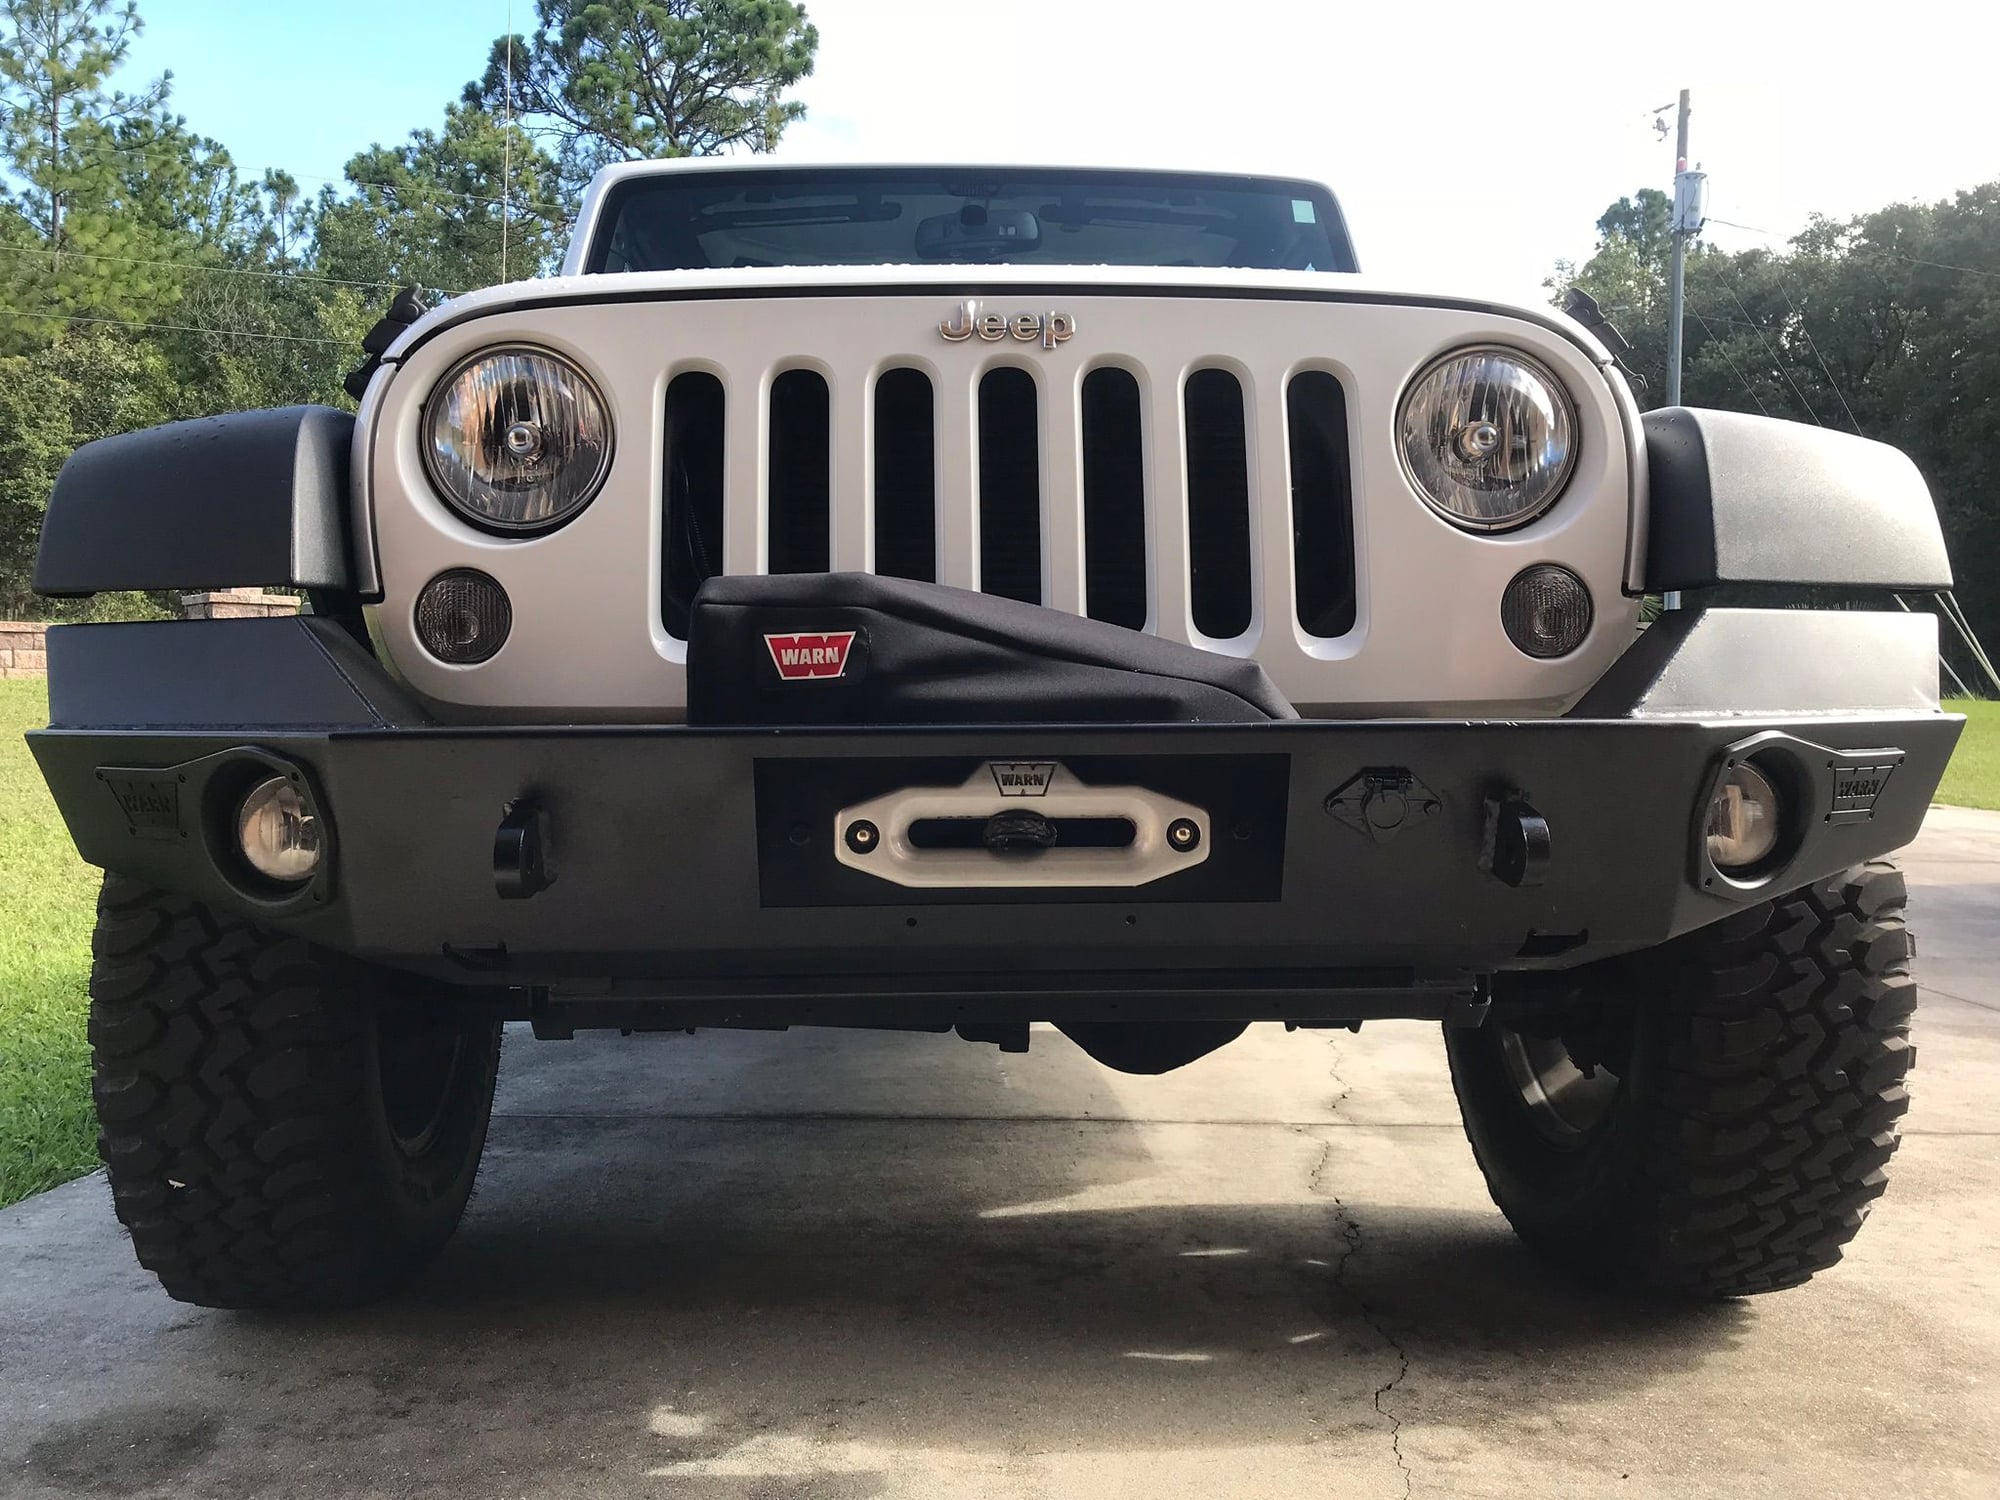 Exterior Body Parts - JK Warn Elite Bumper w/Winch - Used - 2007 to 2018 Jeep Wrangler - Crystal River, FL 34428, United States